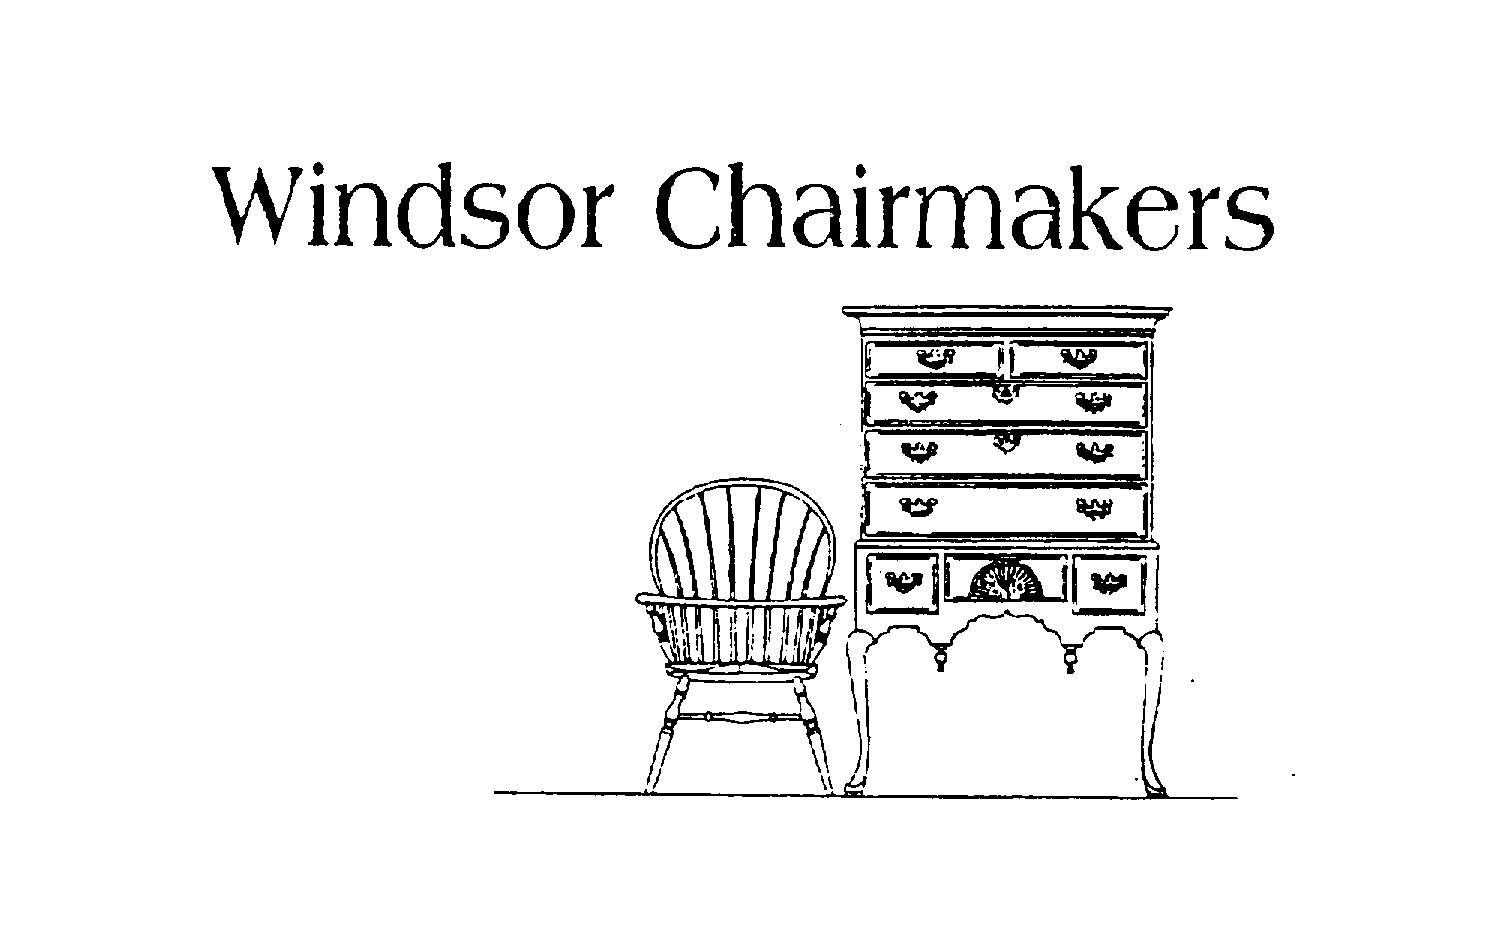  WINDSOR CHAIRMAKERS